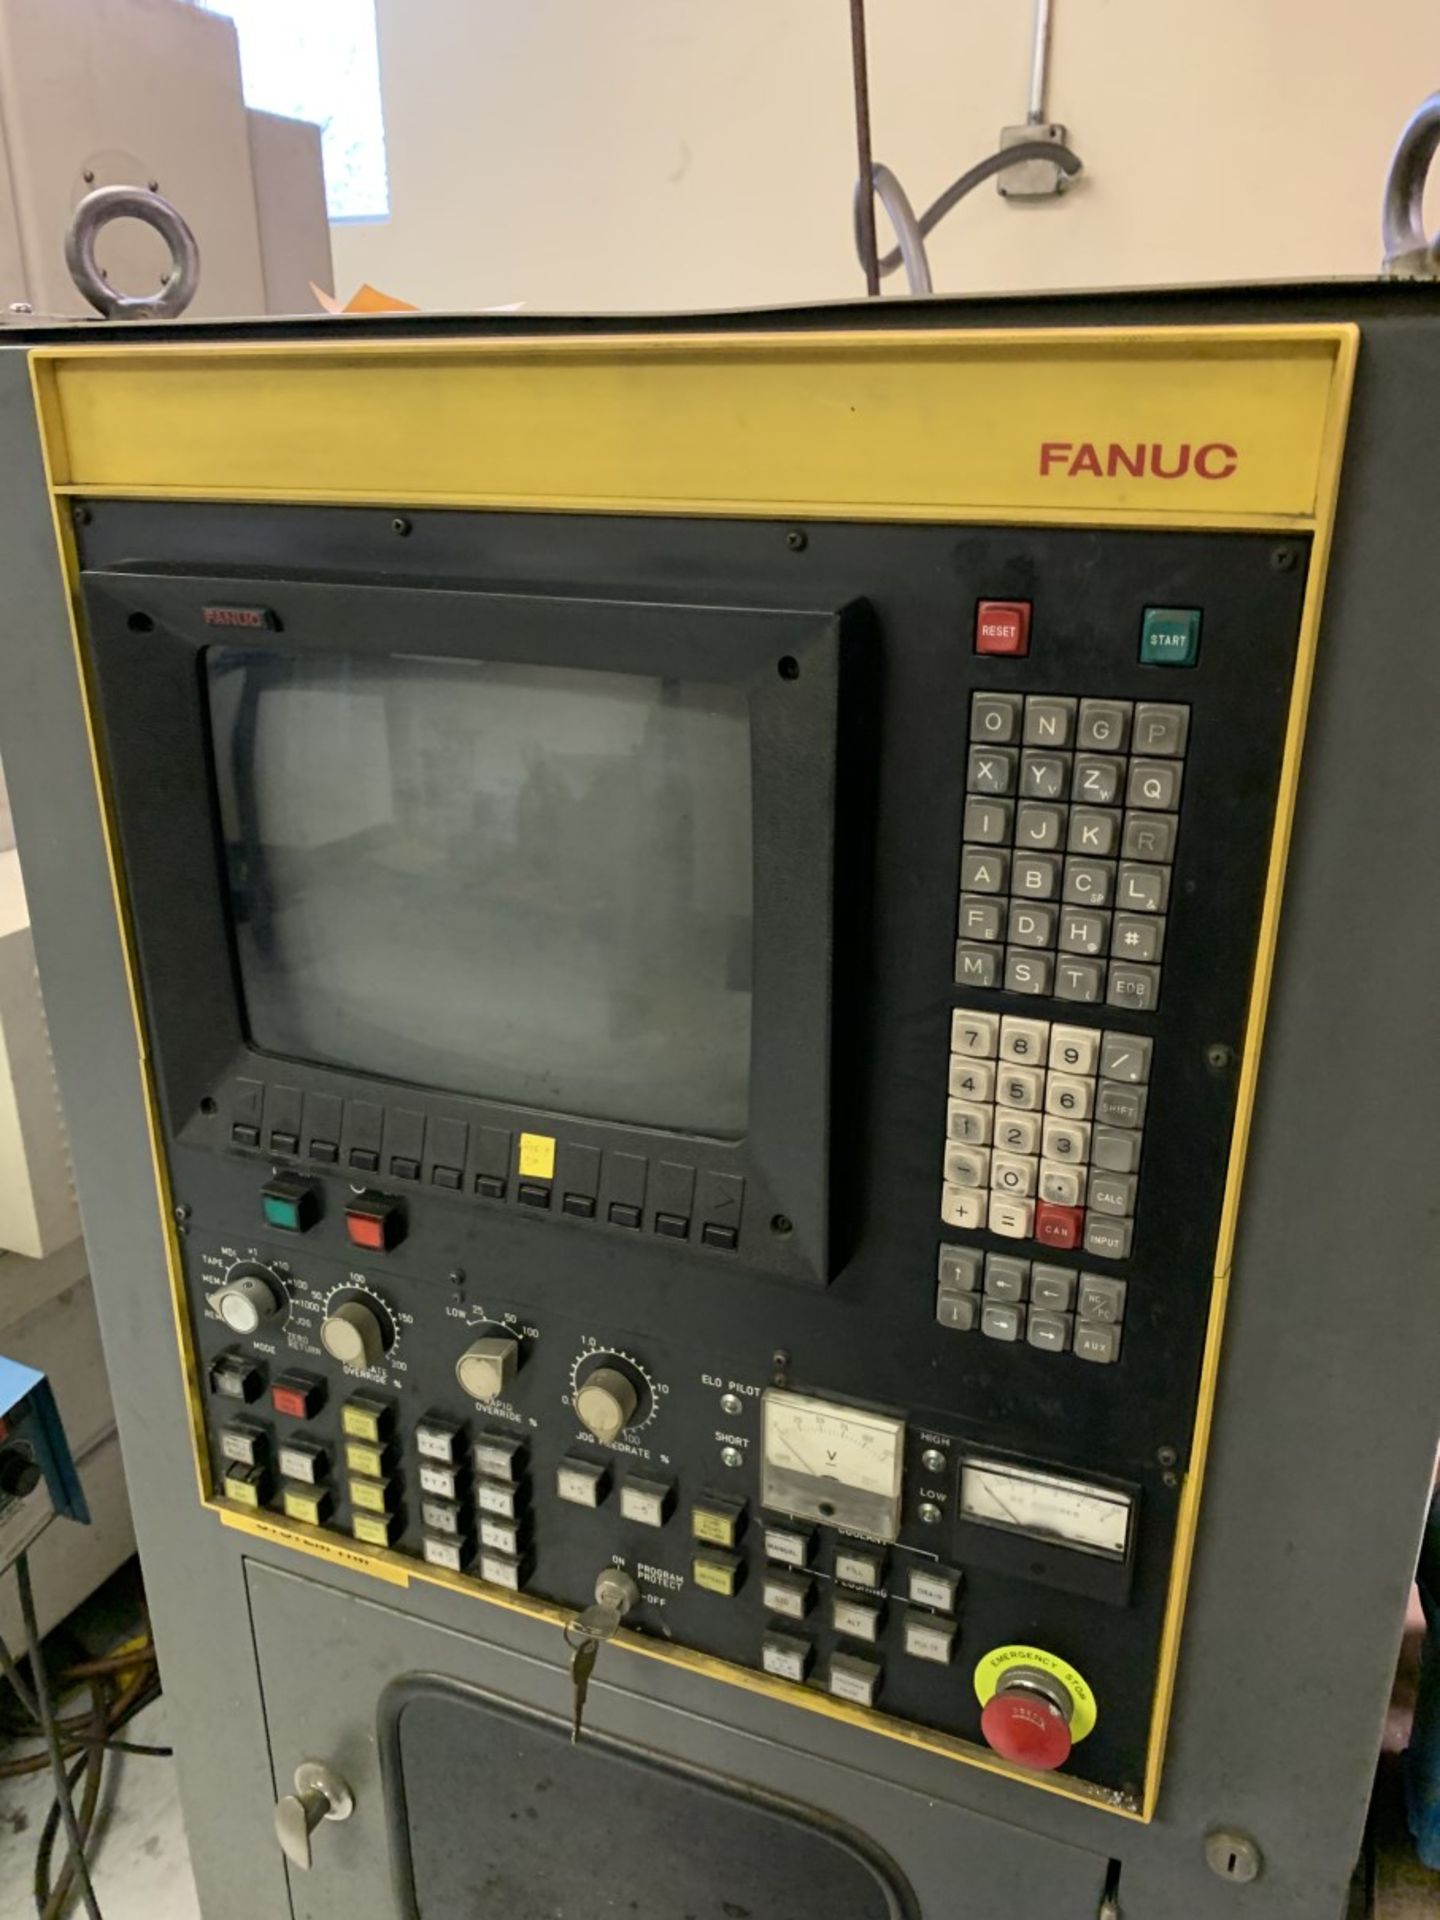 ELOX/FANUC TAPE SINK MODEL A EDM, s/n S-6A0024, Fanuc System 11M CNC Control, 19.75” x 11.75” Table, - Image 5 of 7